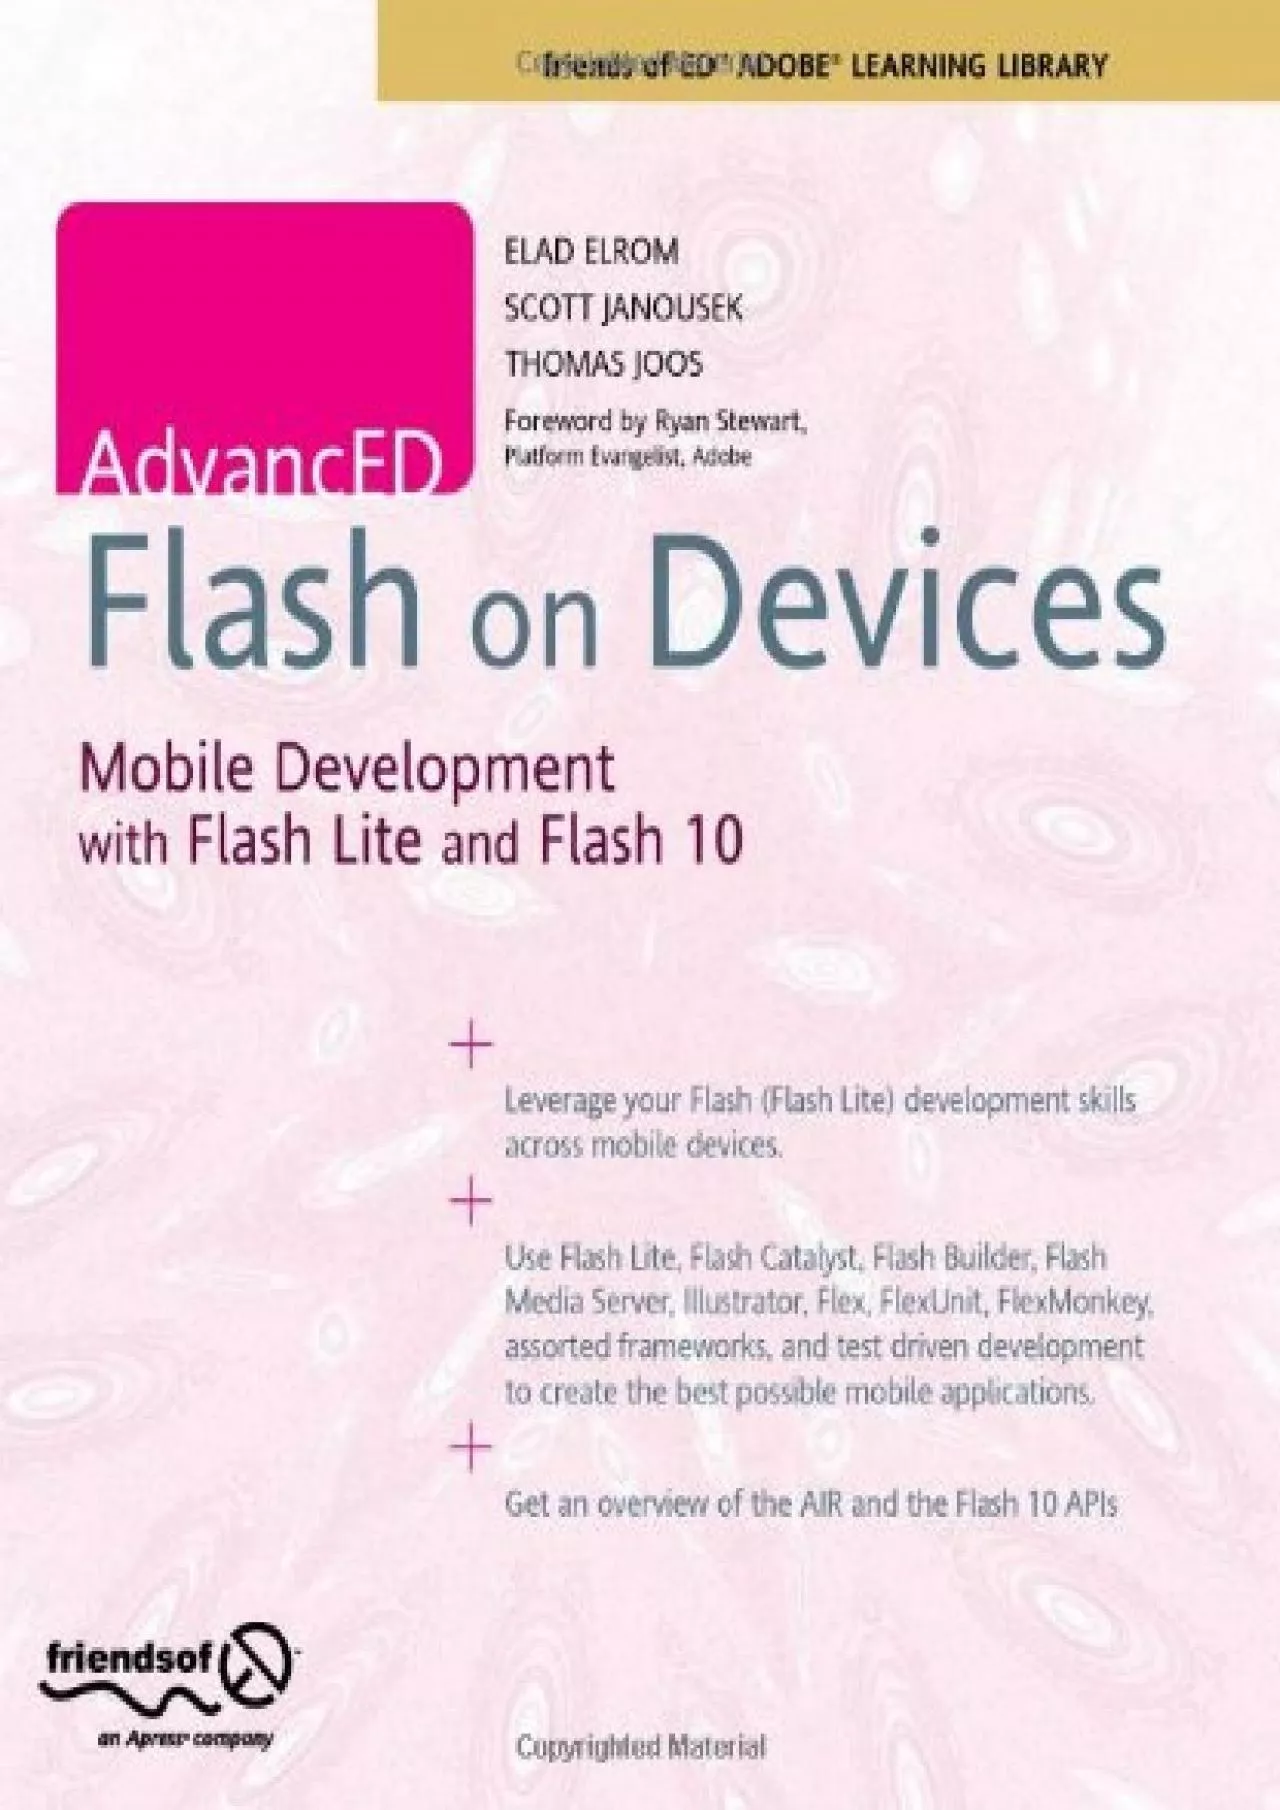 (EBOOK)-AdvancED Flash on Devices: Mobile Development with Flash Lite and Flash 10 (Friends